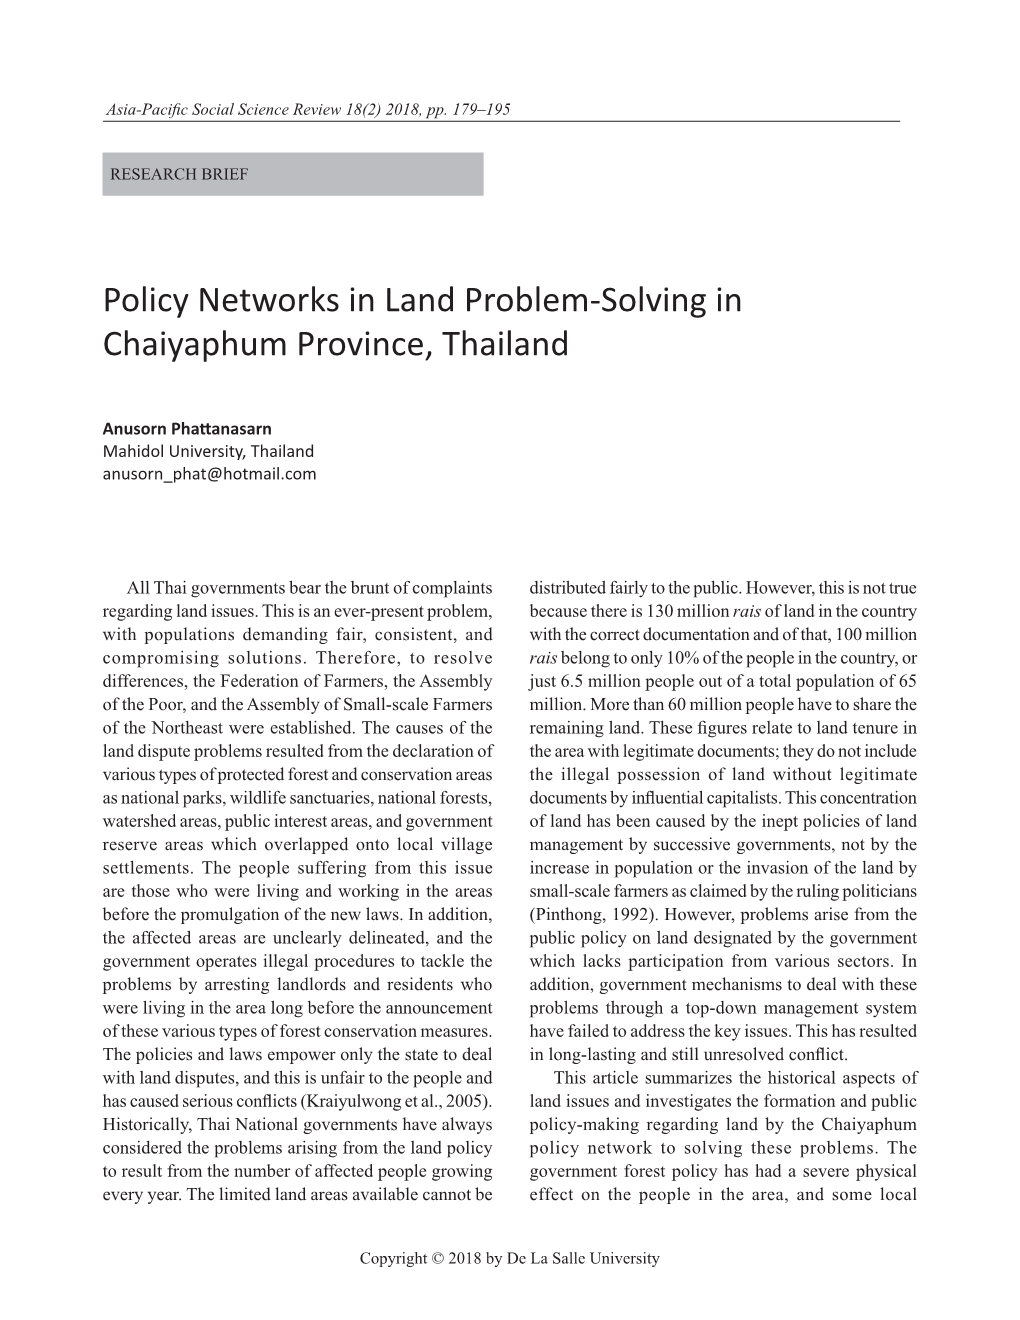 Policy Networks in Land Problem-Solving in Chaiyaphum Province, Thailand